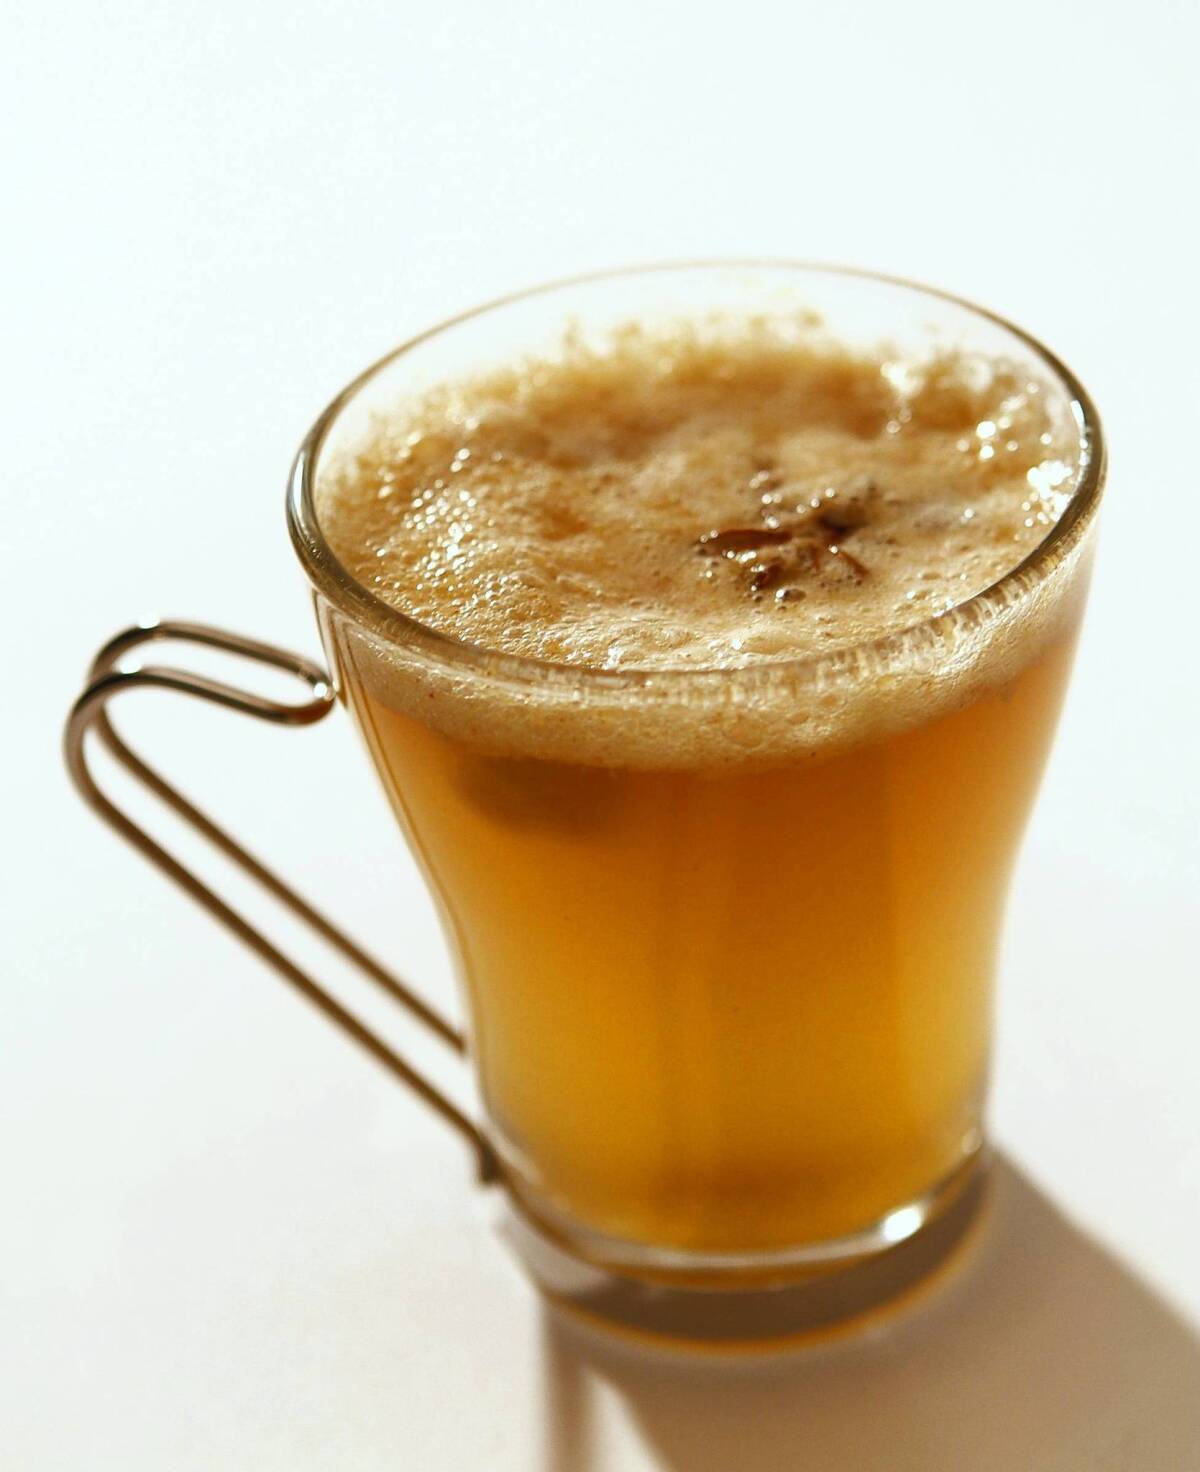 Le Ka's hot banana buttered rum, created by Andrew Parish. Recipe.